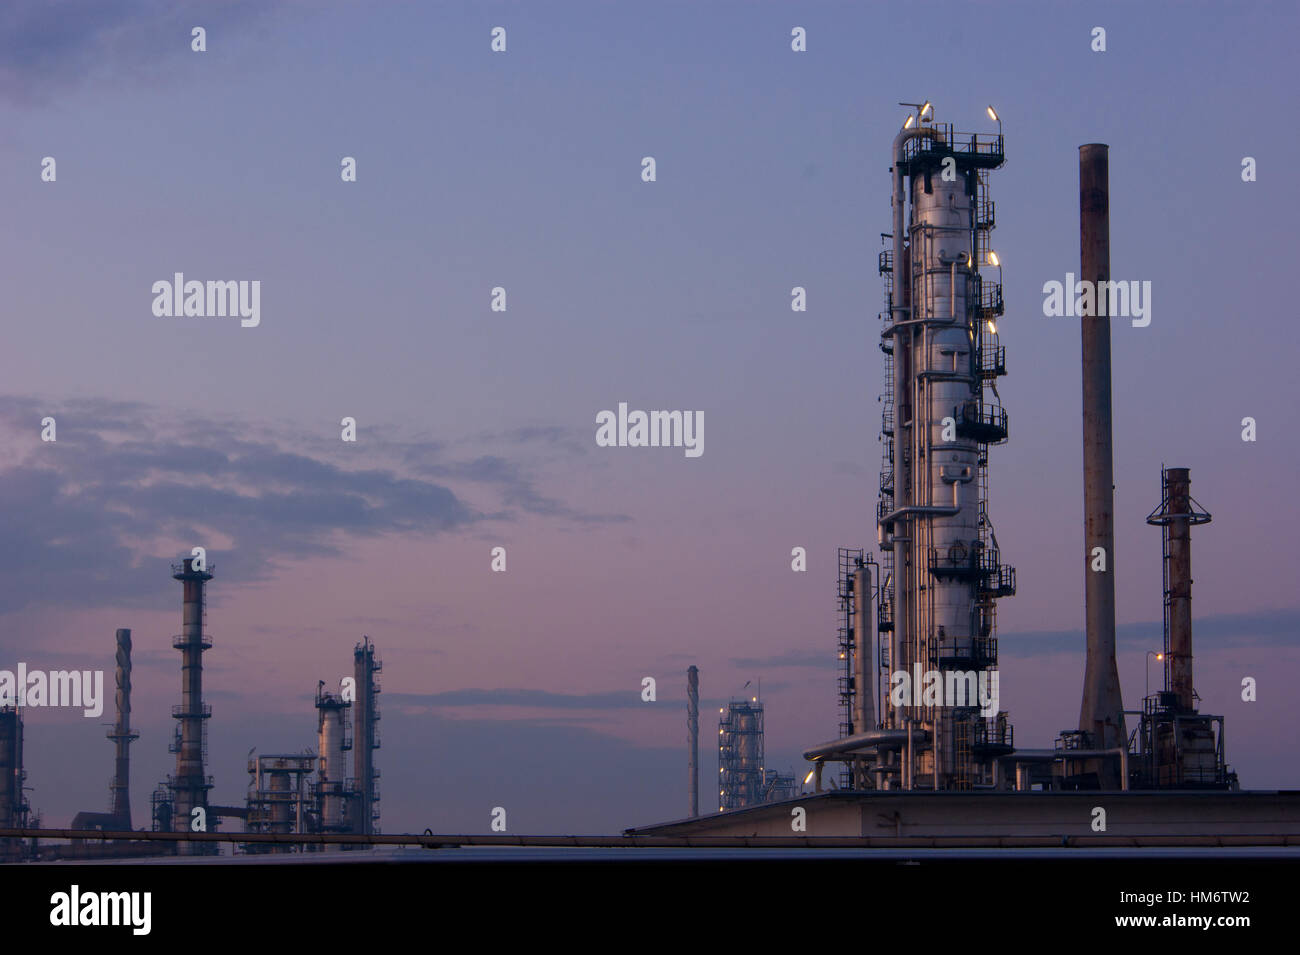 Flue-gas stack steel chimneys in a disused Amoco / Tamoil oil refinery plant in Cremona, Italy, at dusk Stock Photo